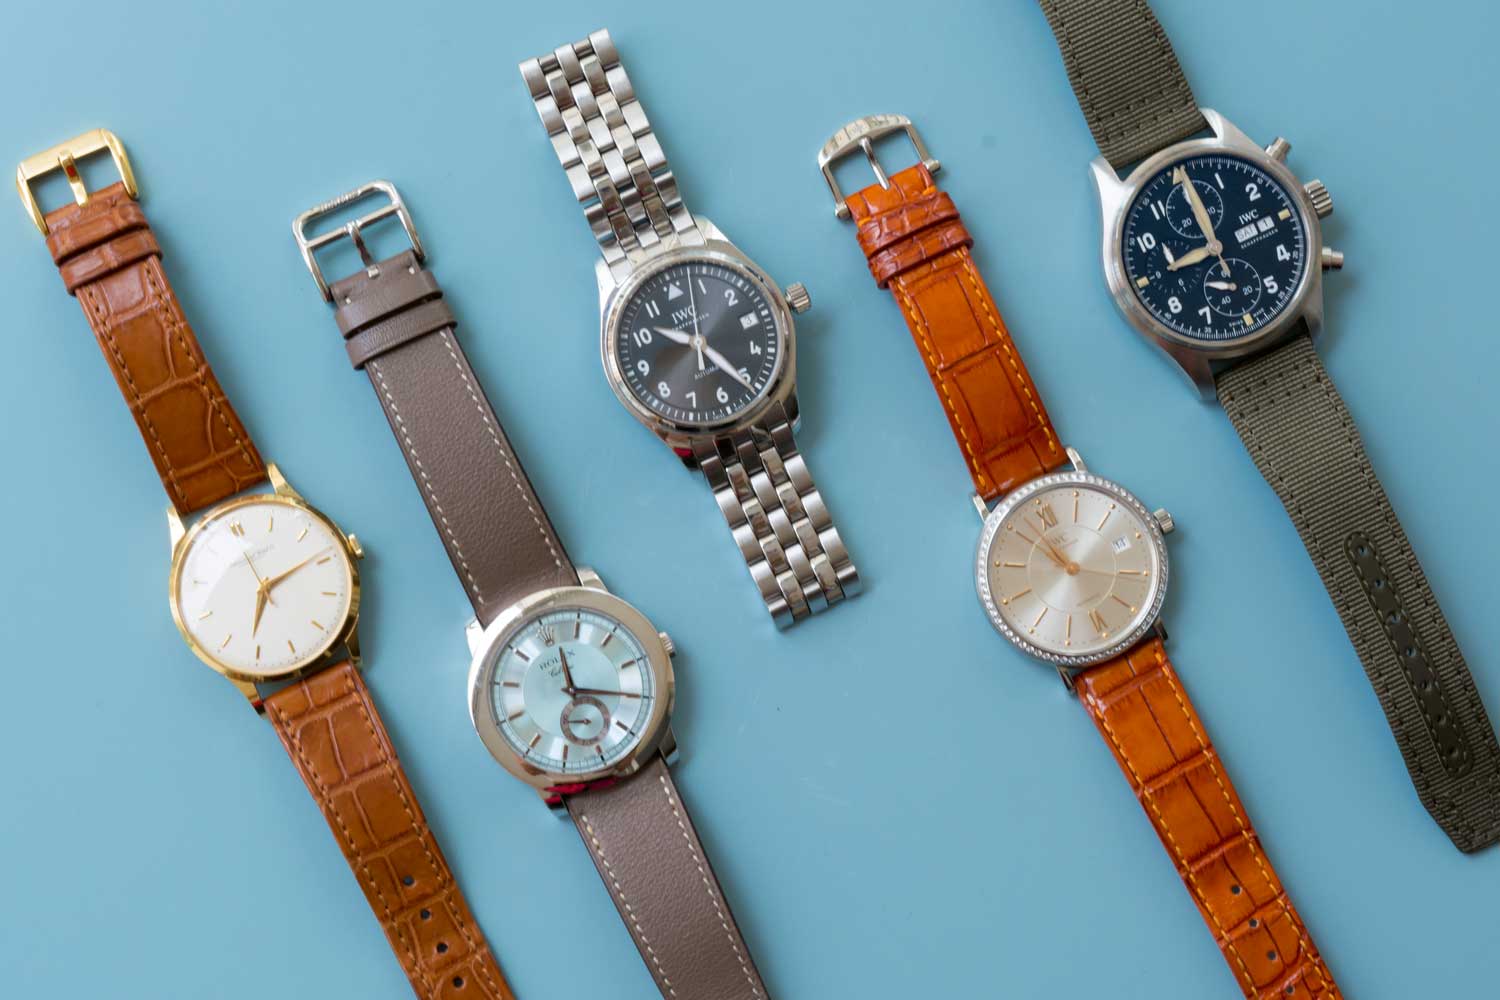 Some of the watches in Déby's collection